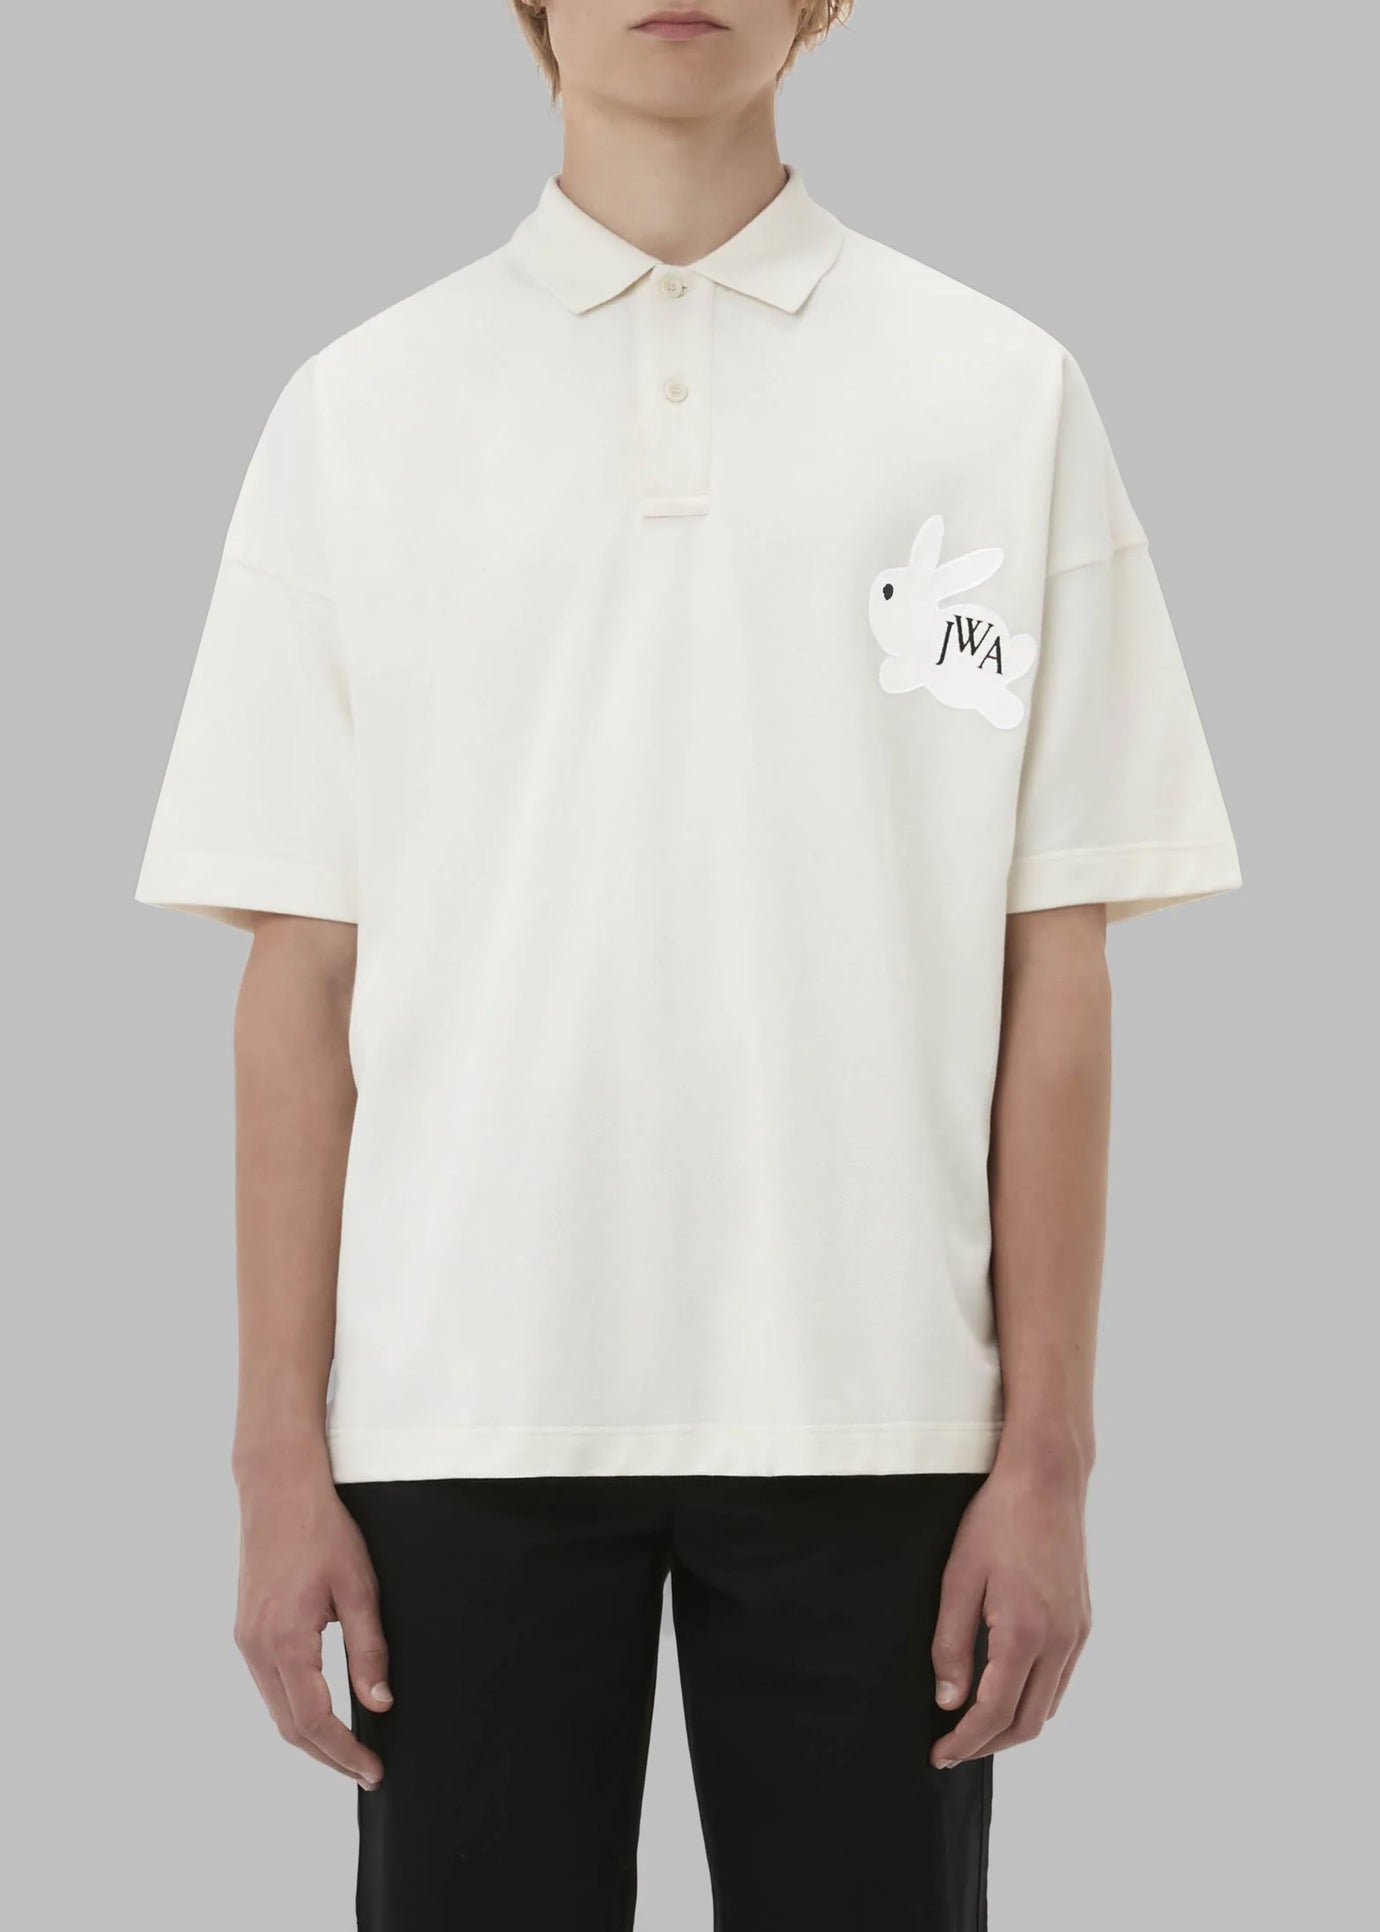 JW Anderson Bunny Embroidery Polo Shirt - Beige - 1